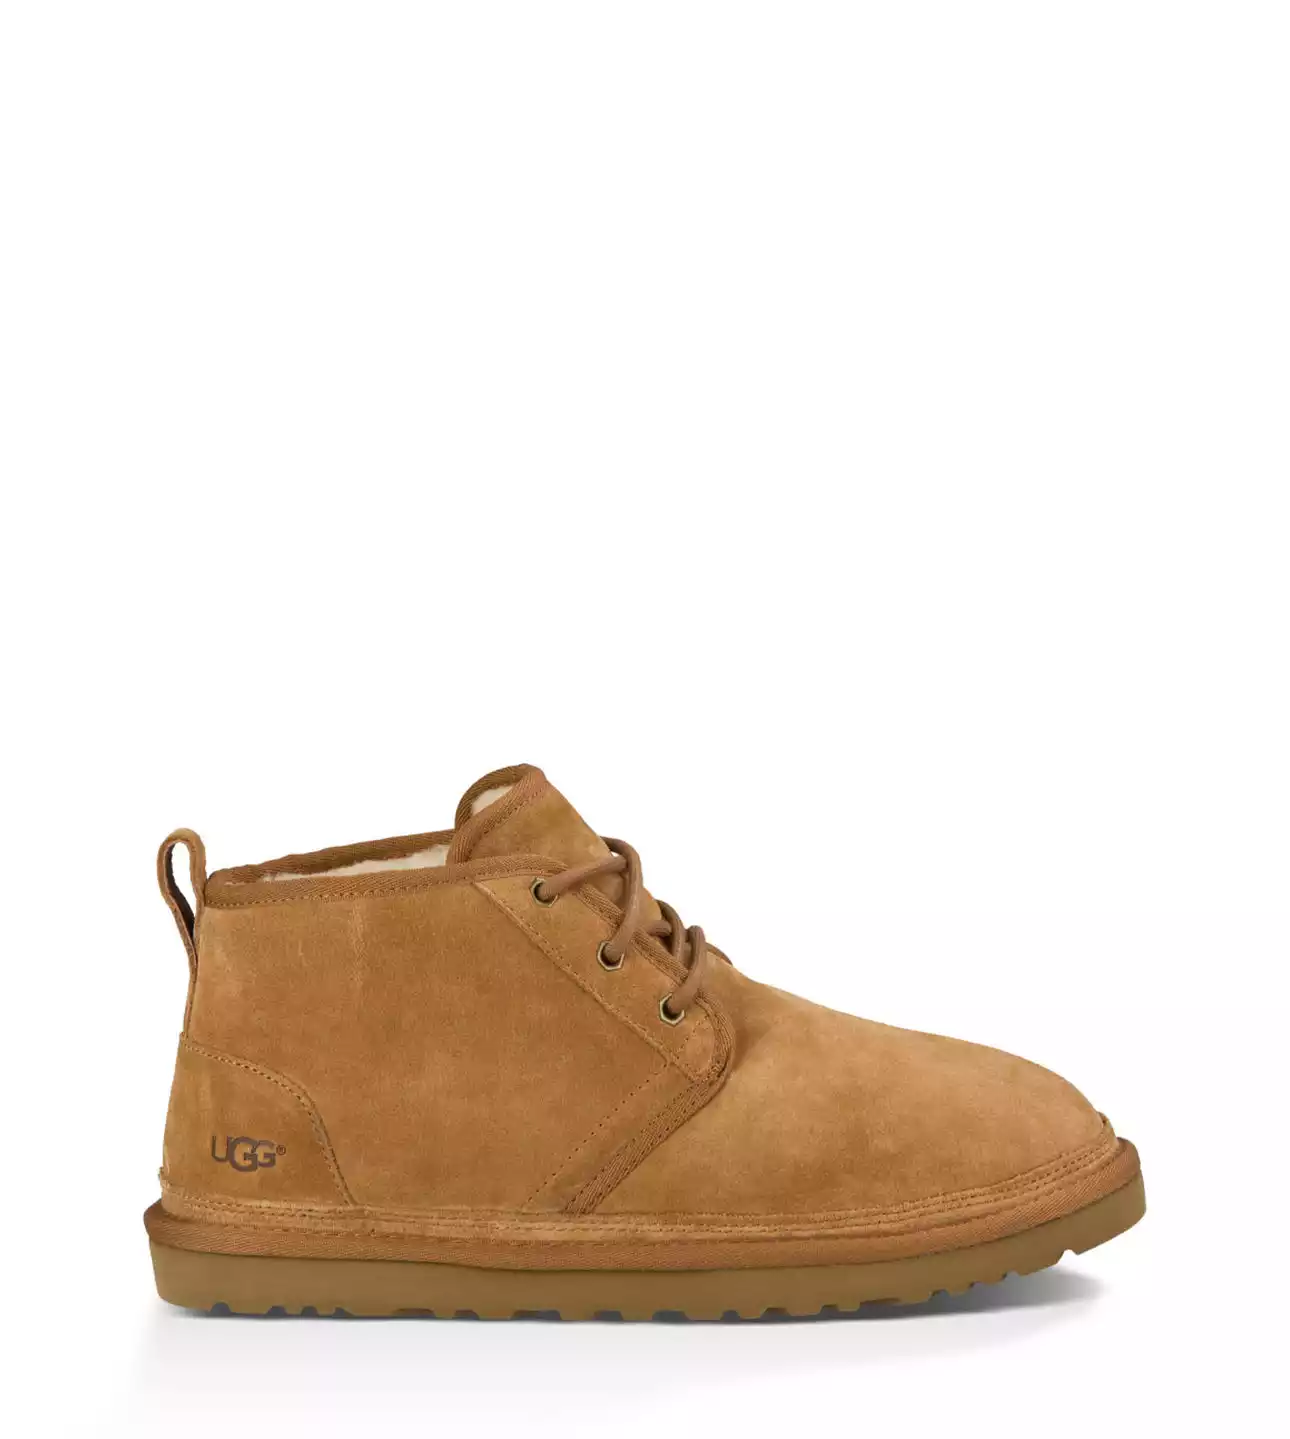 Ugg Men’s Neumel Boots, a new piece of footwear that are becoming more popular for boys. They cost $130 and are shown in the color chestnut.  (image credit Ugg.com)